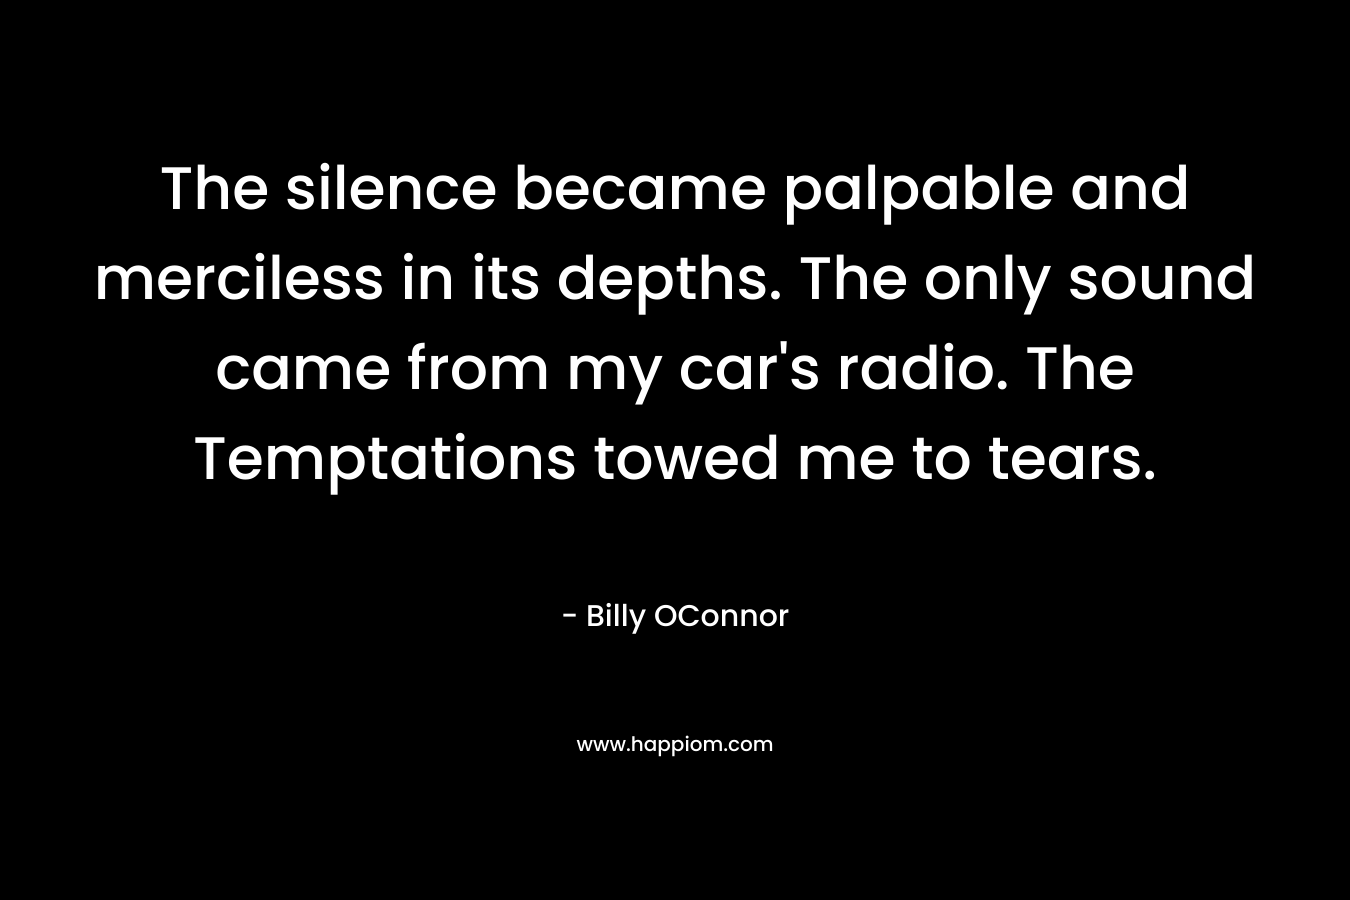 The silence became palpable and merciless in its depths. The only sound came from my car’s radio. The Temptations towed me to tears. – Billy OConnor